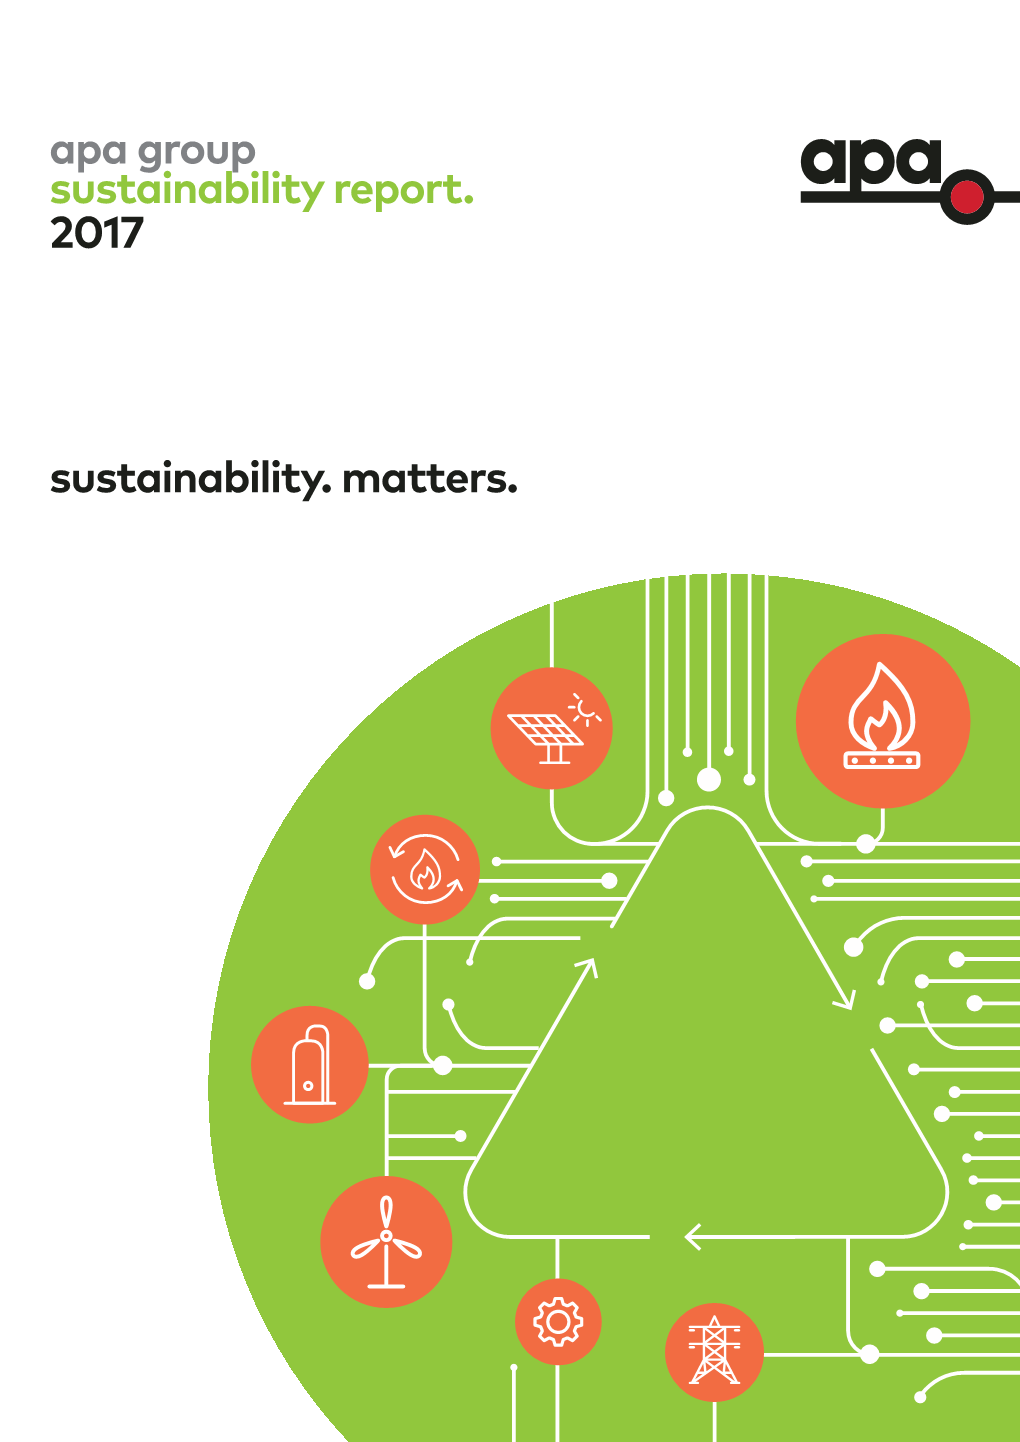 2017 Sustainability Report As a Record and Inclusion, Encouraging Innovation of Our Performance and Accountability and Organisational Development to Our Stakeholders